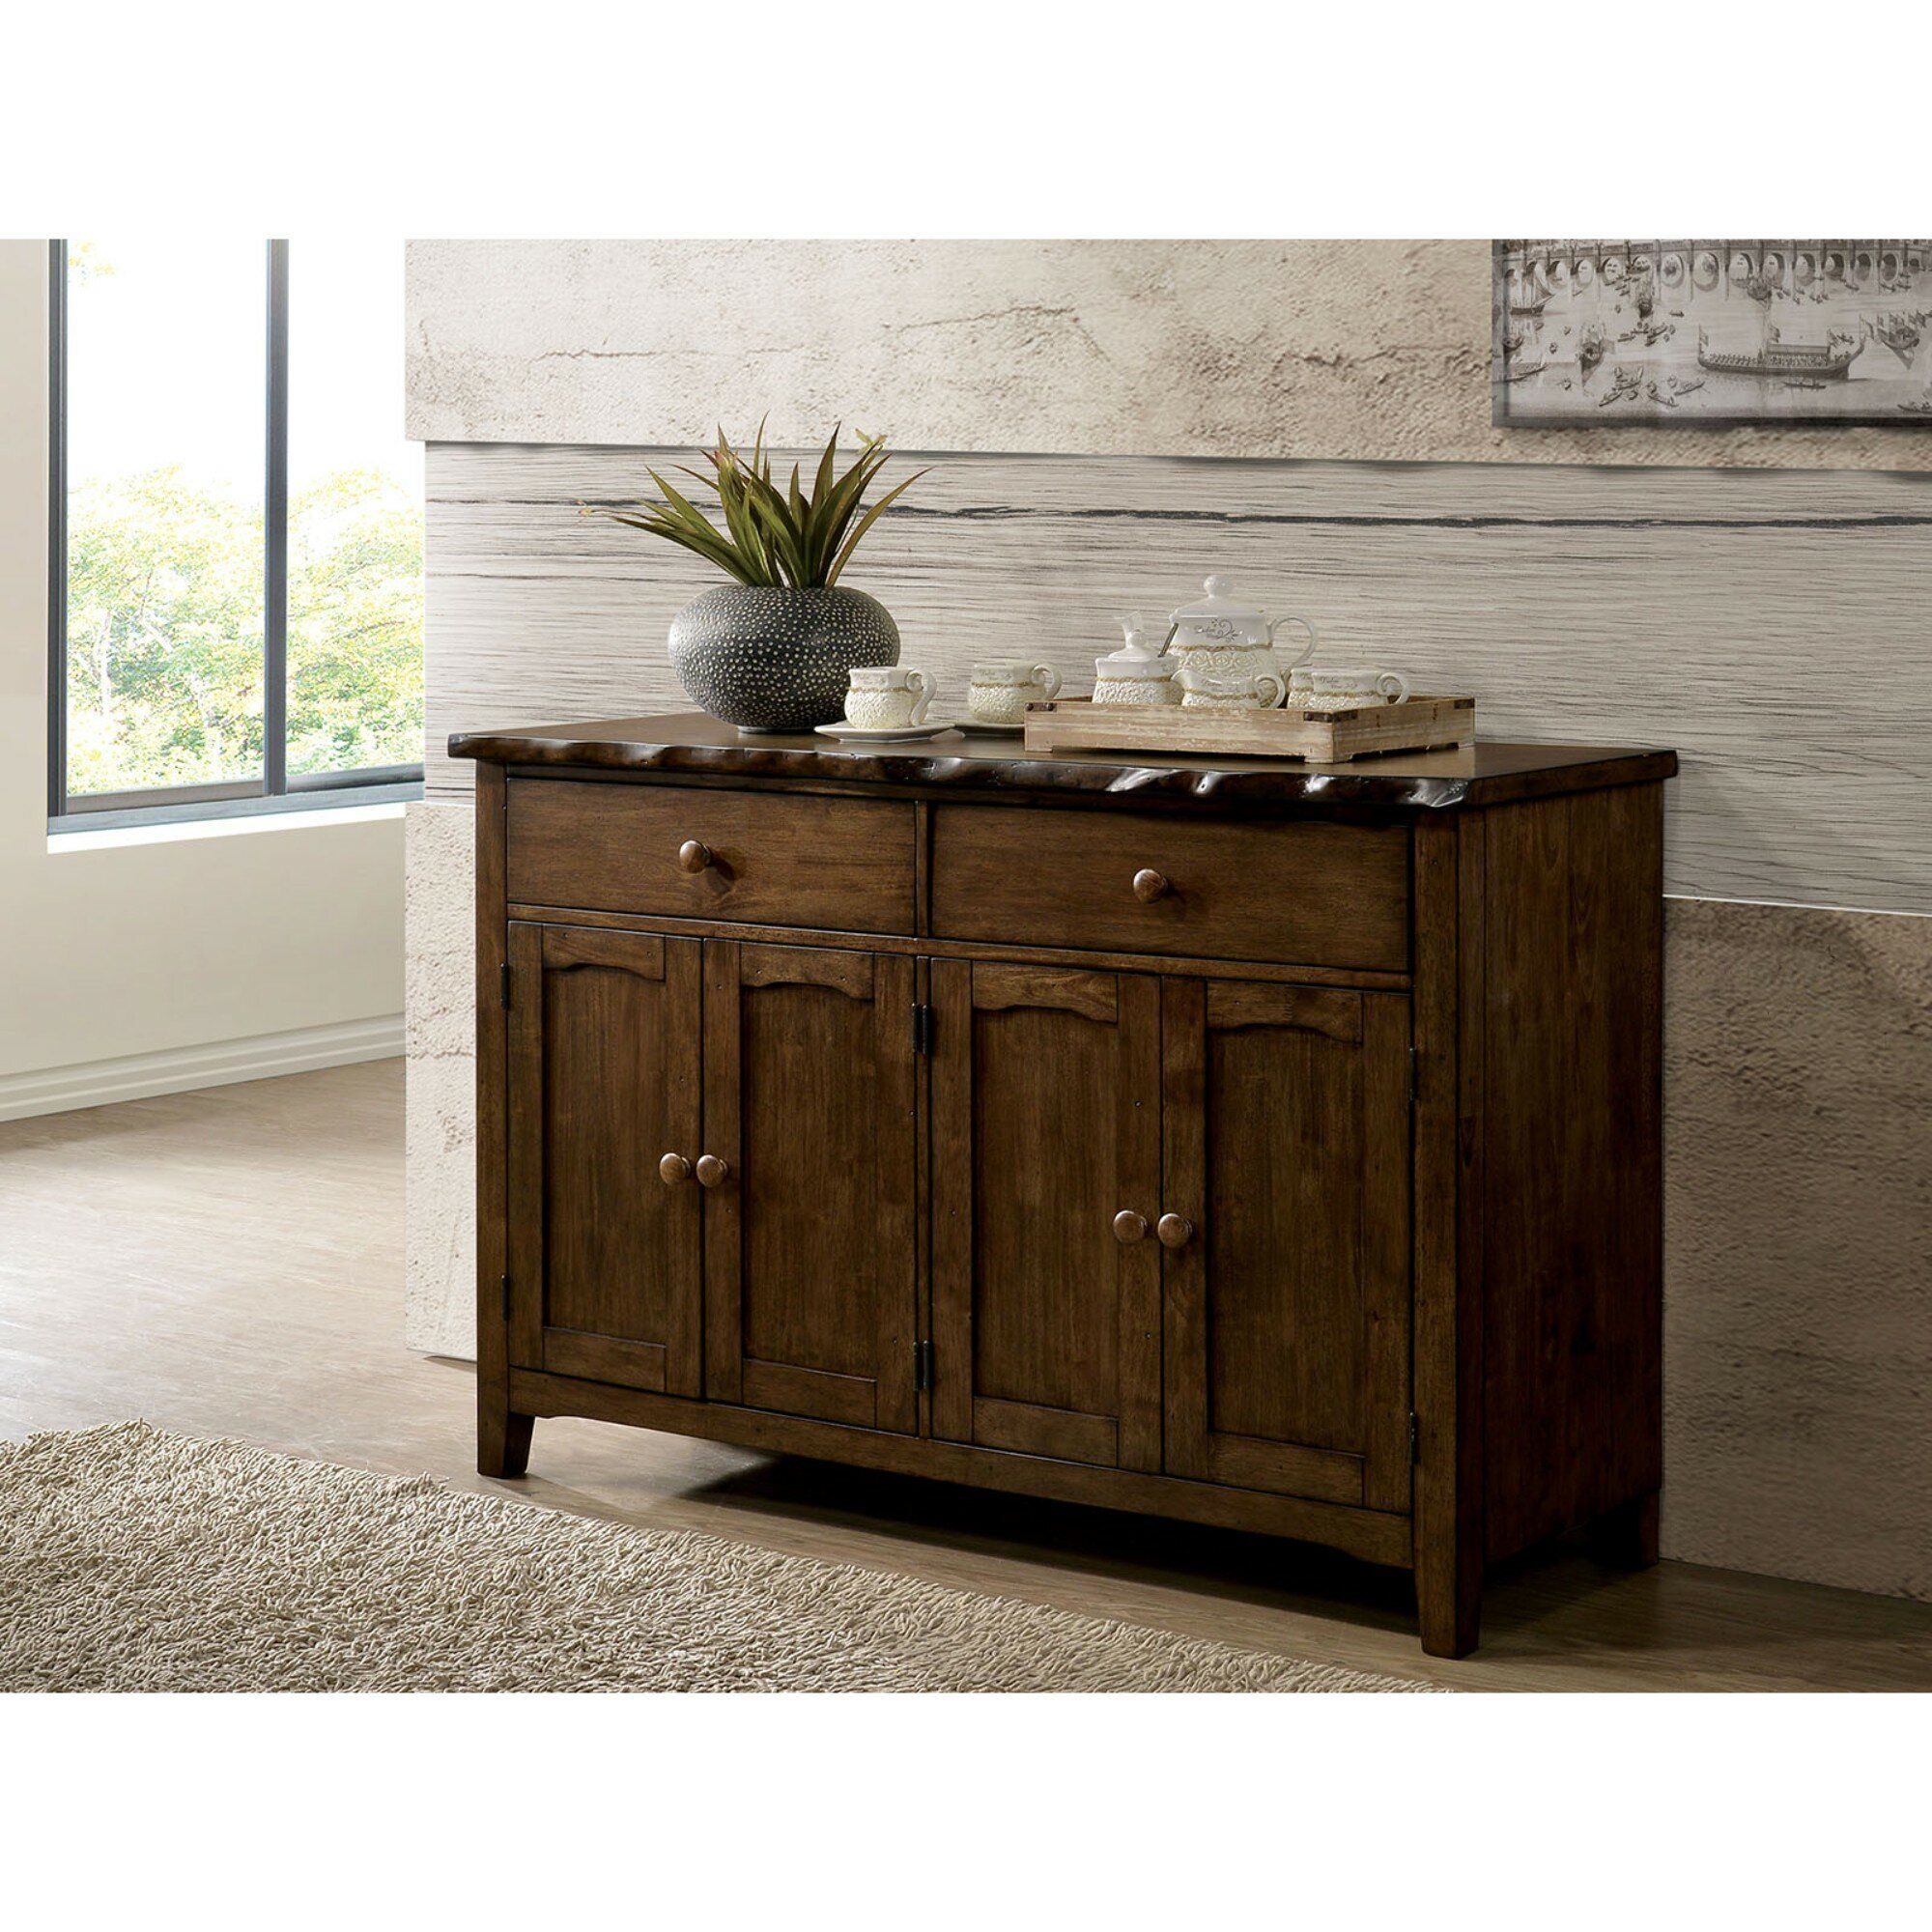 Sprowston Rustic Solid Wood Rectangular Sideboard Pertaining To Whitten Sideboards (View 12 of 30)